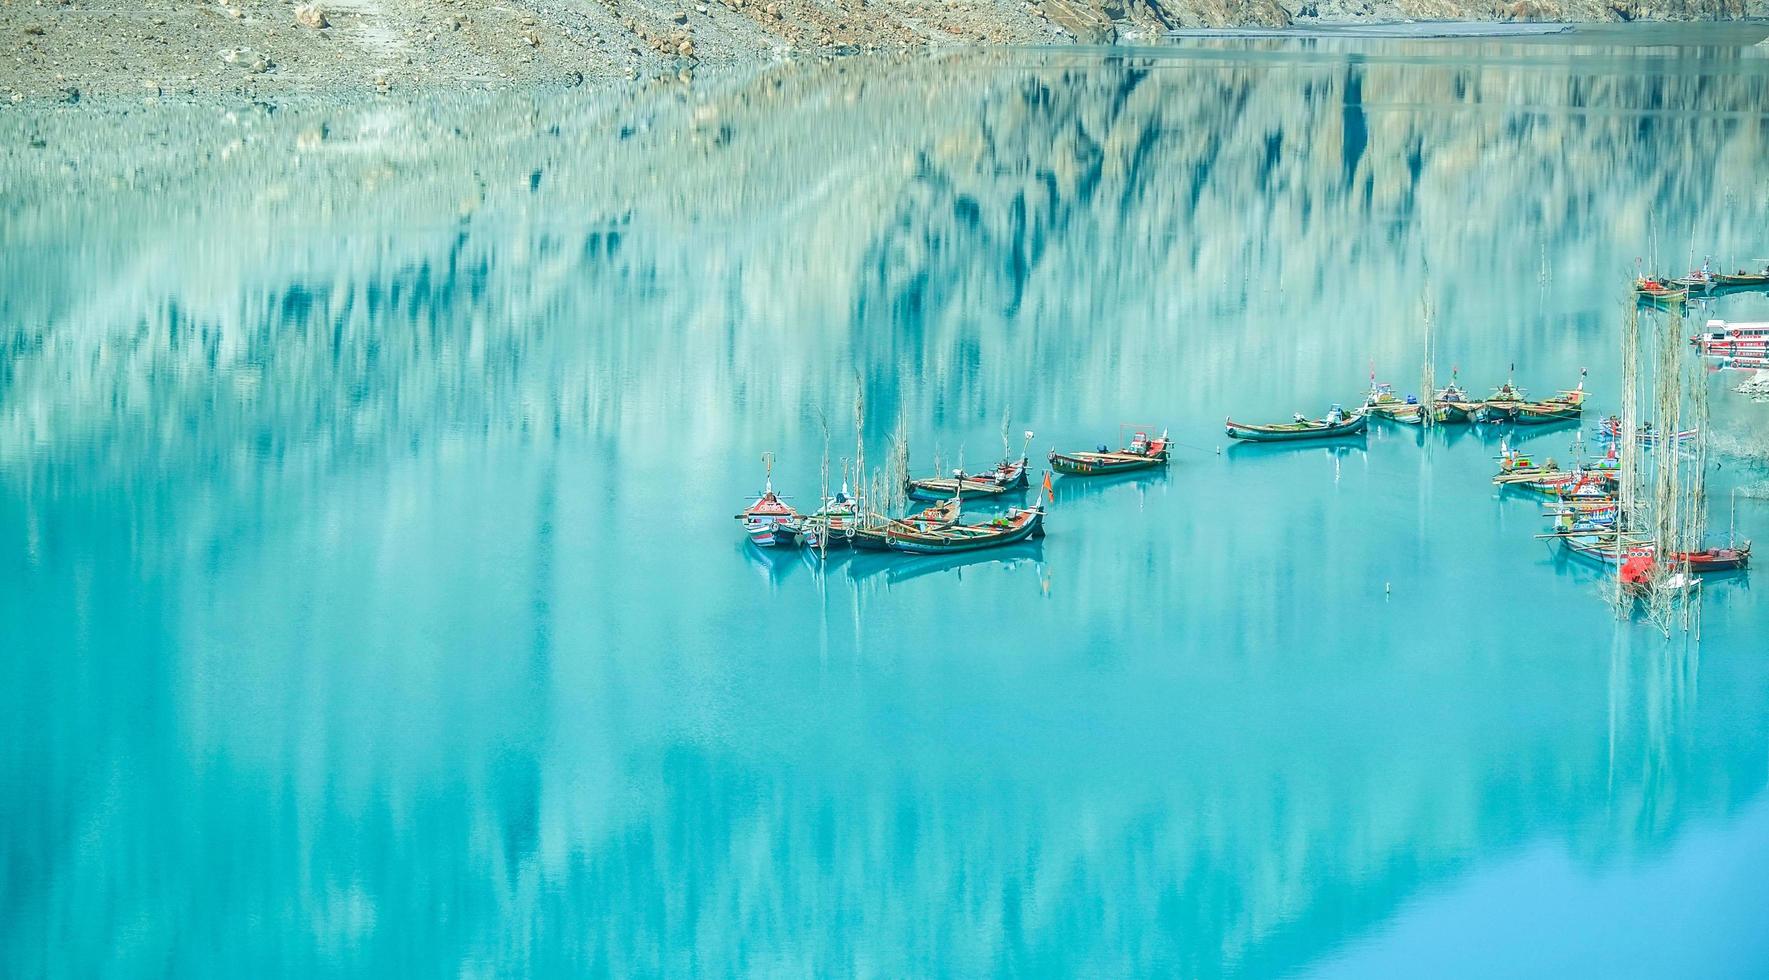 Docked boats in the Attabad Lake  photo